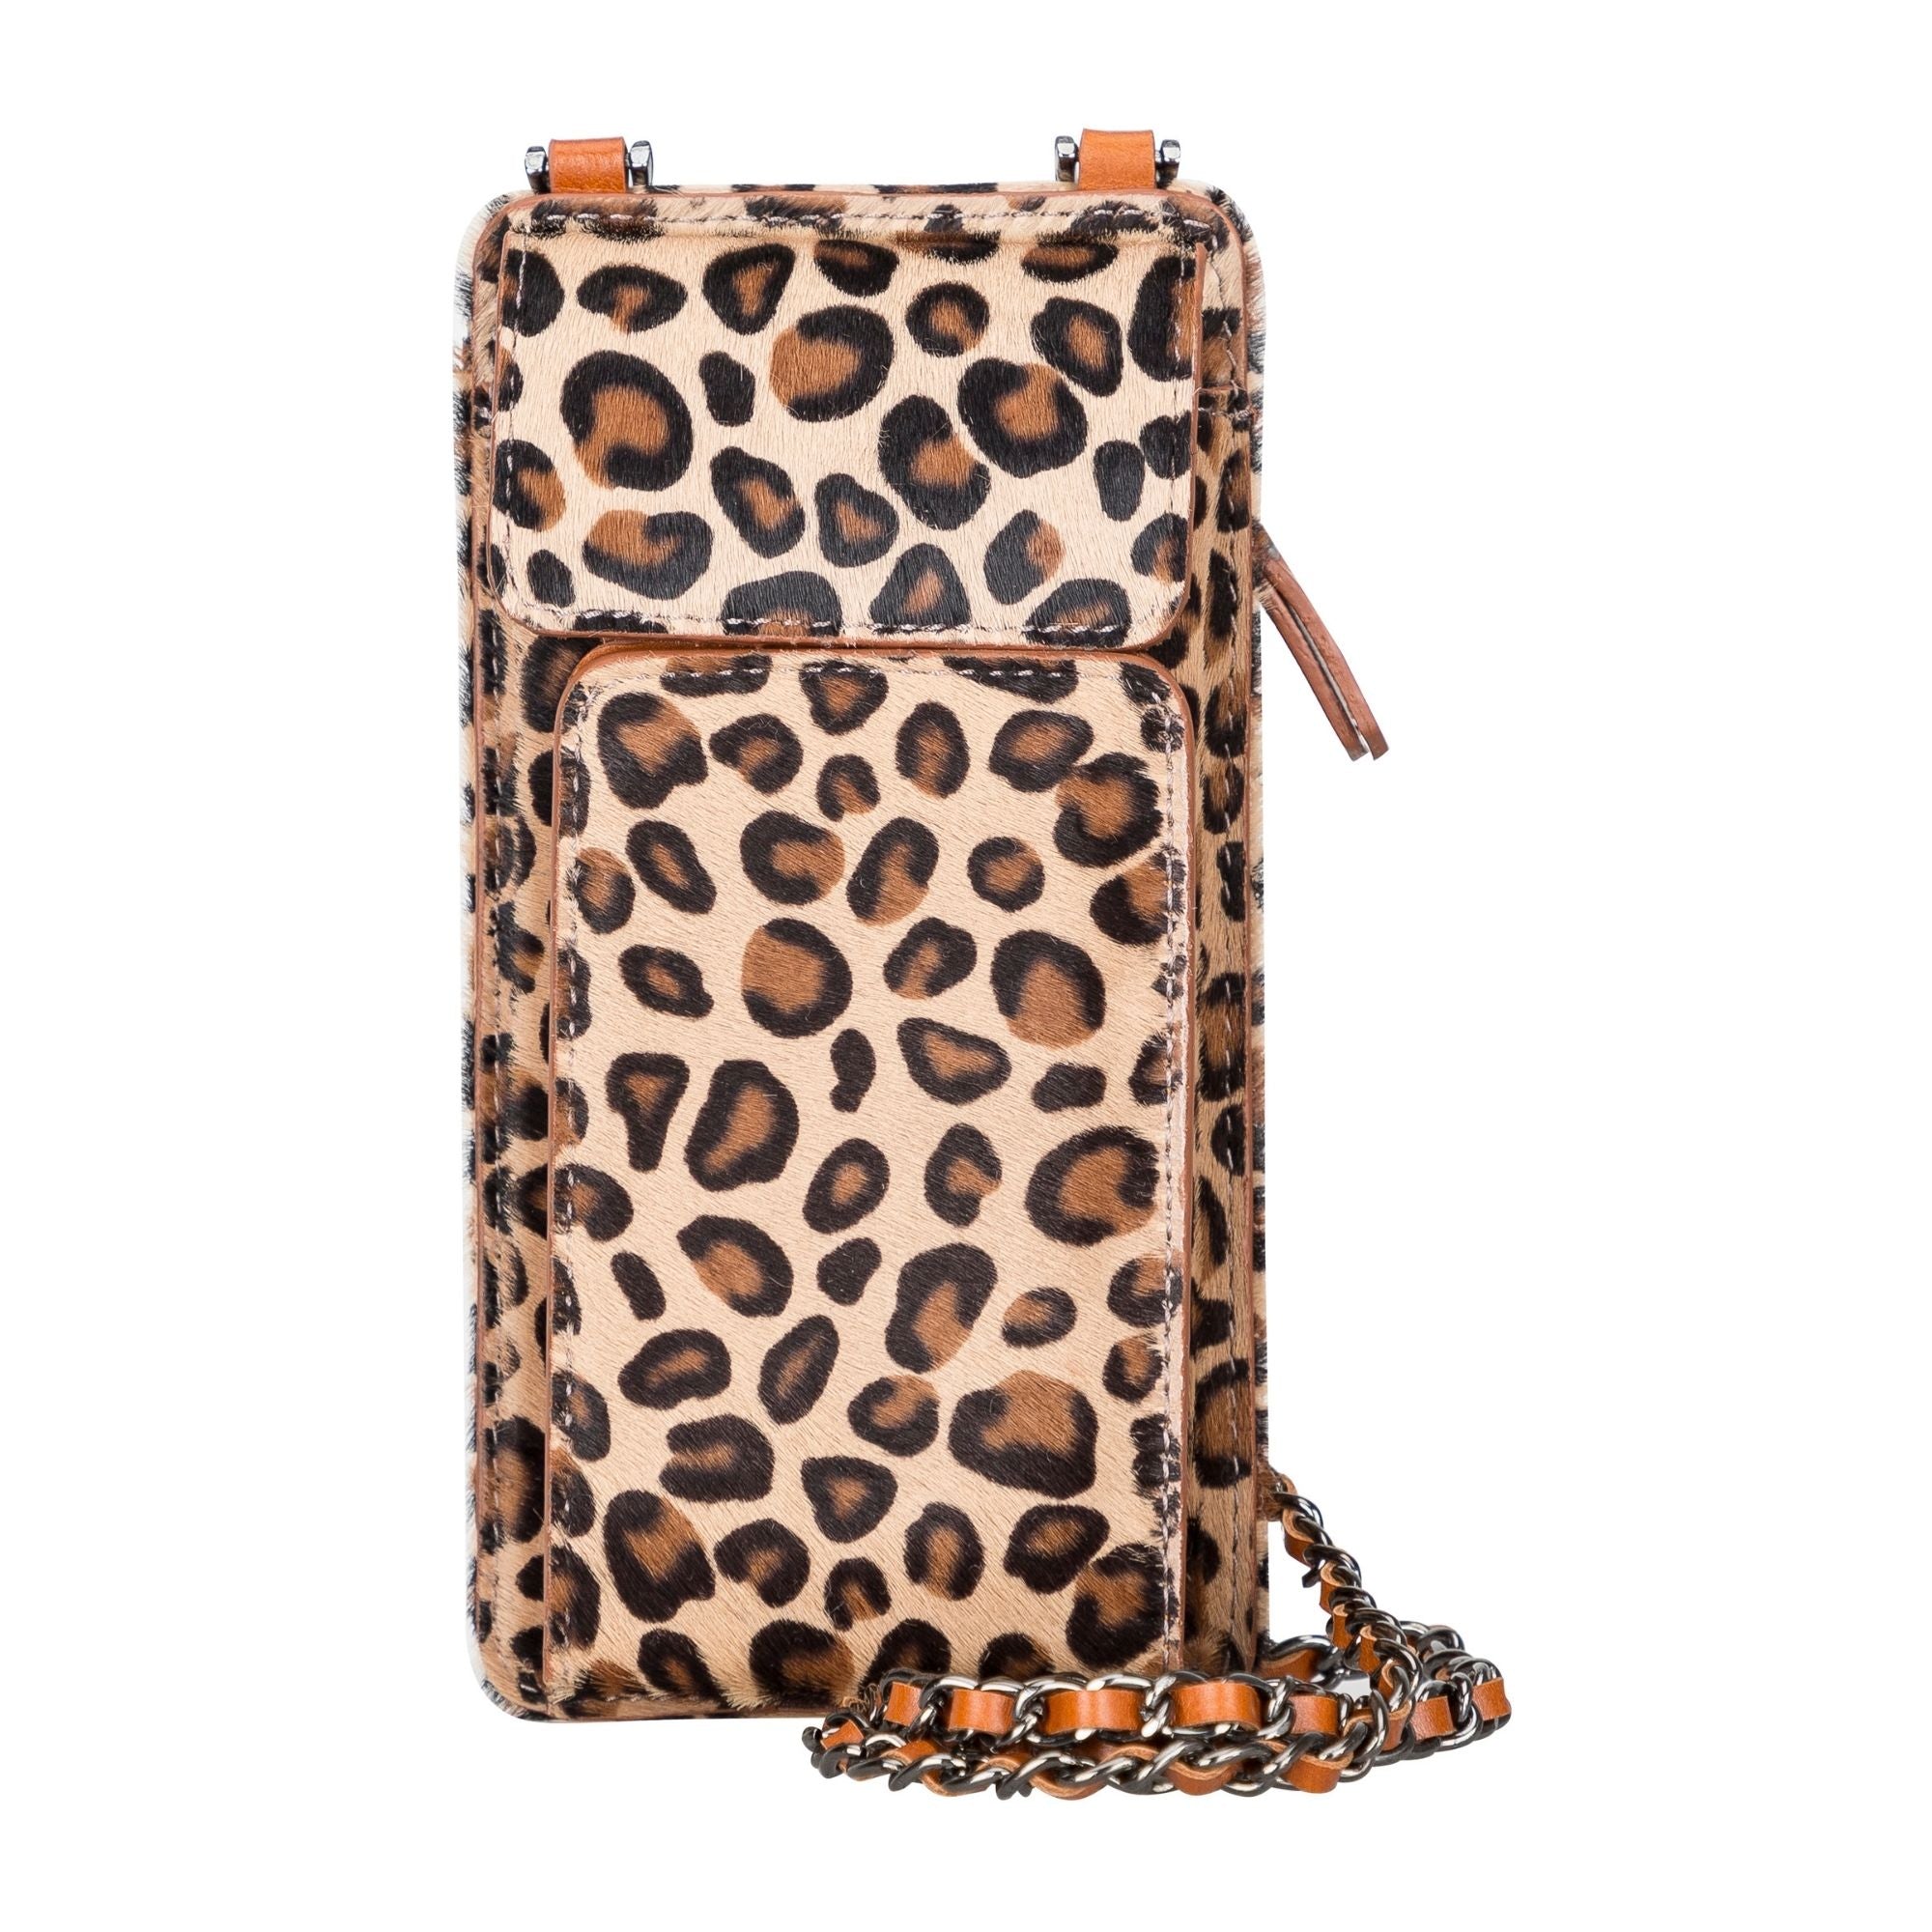 Lovell Leather Handbag with Phone Compartment and Shoulder Strap - Leopard Pattern - TORONATA